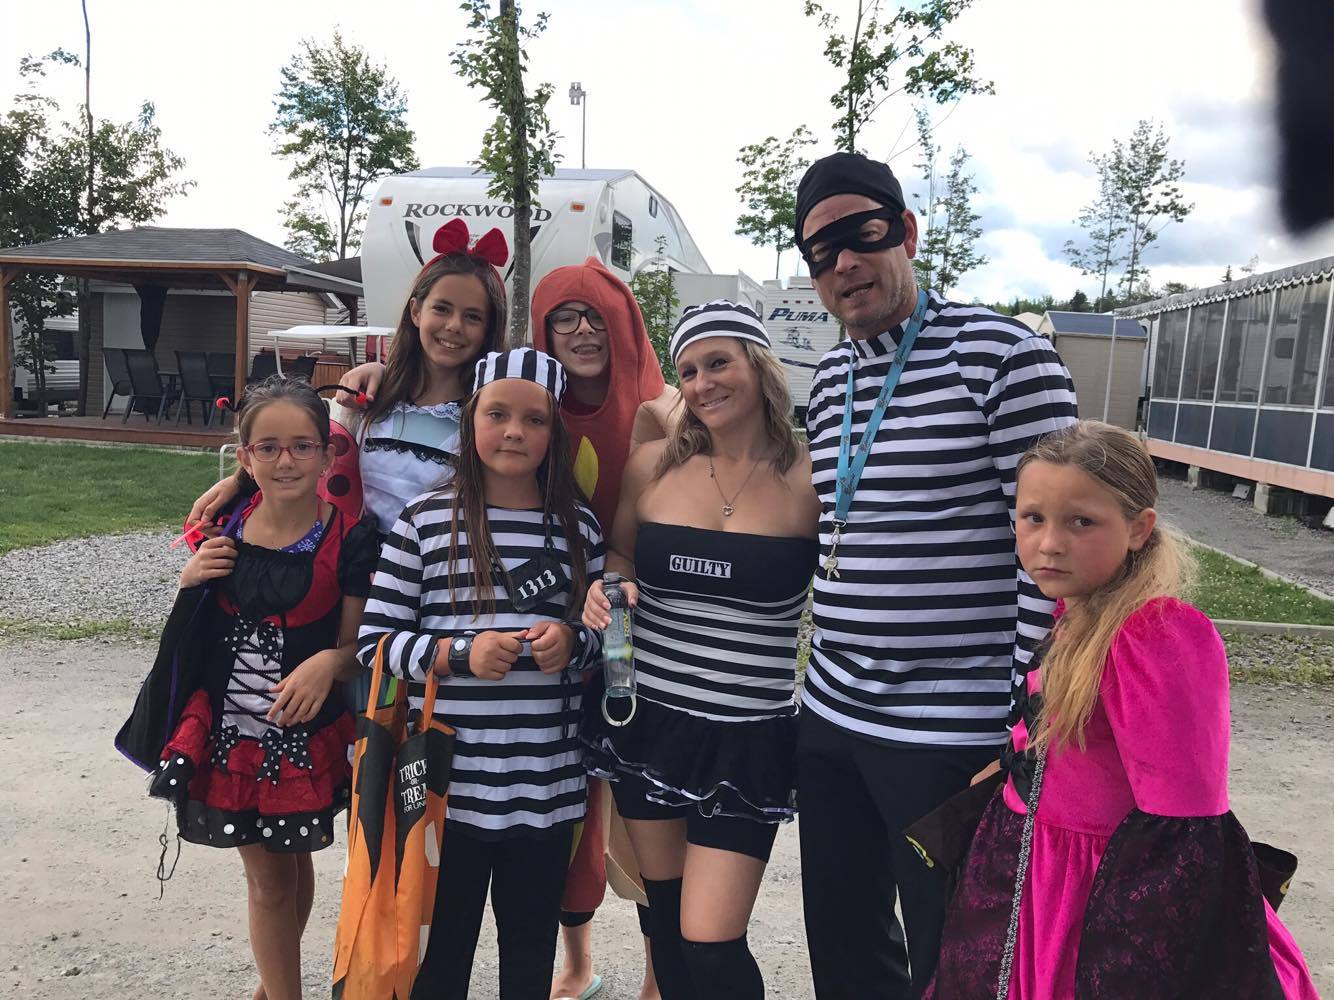 http://www.familycampgrounds.ca/wp-content/uploads/2017/08/halloween-2017-complexe-atlantide-18.jpg